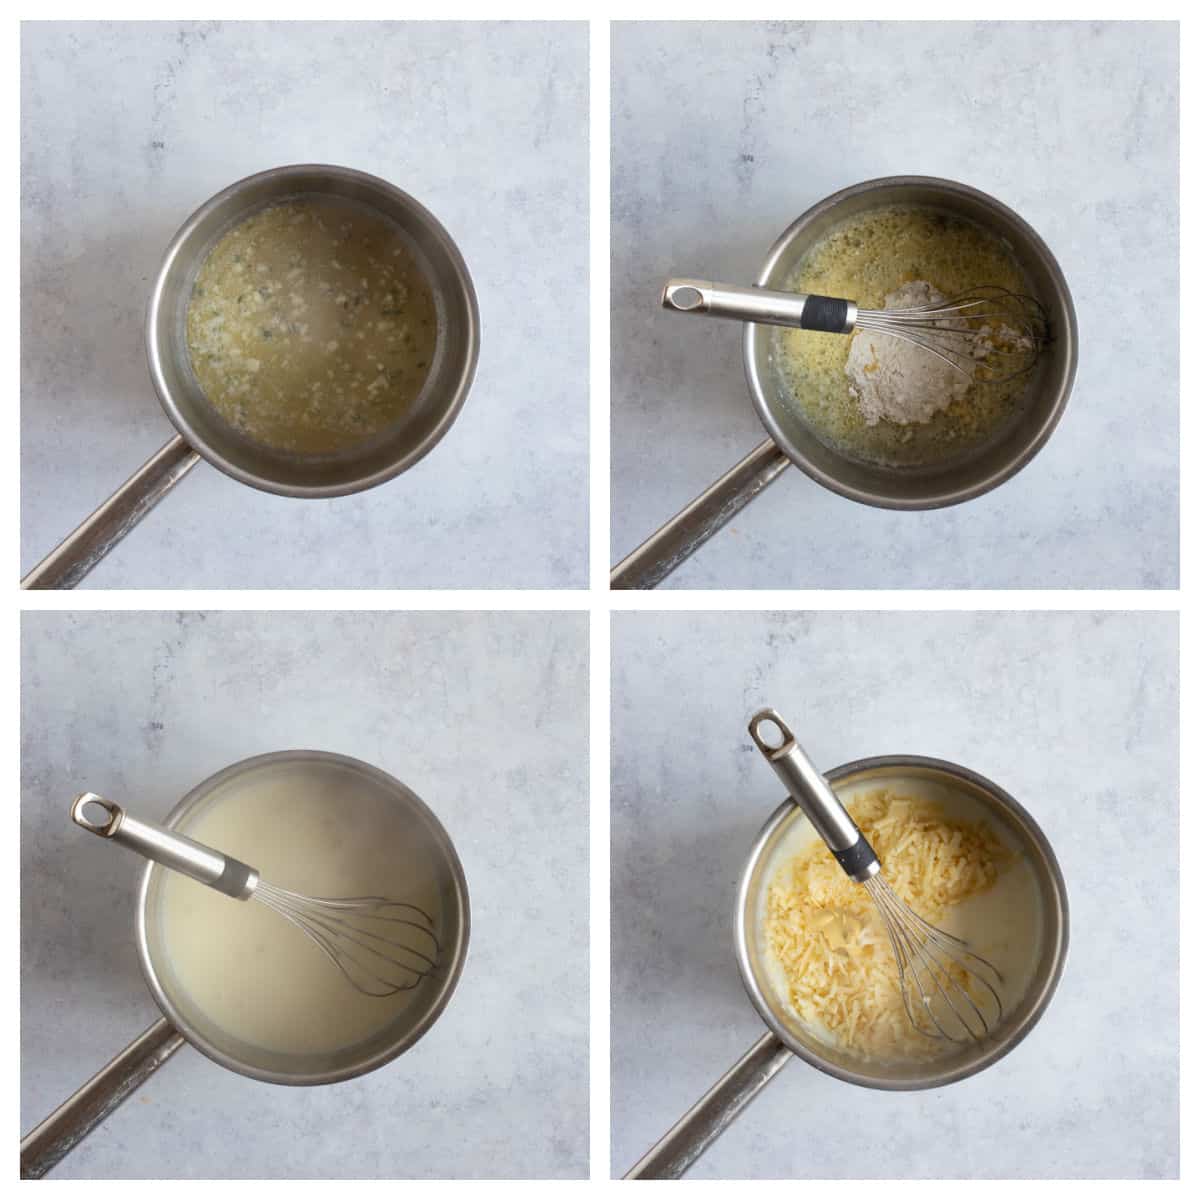 Step by step photo instructions for making a cheese sauce.